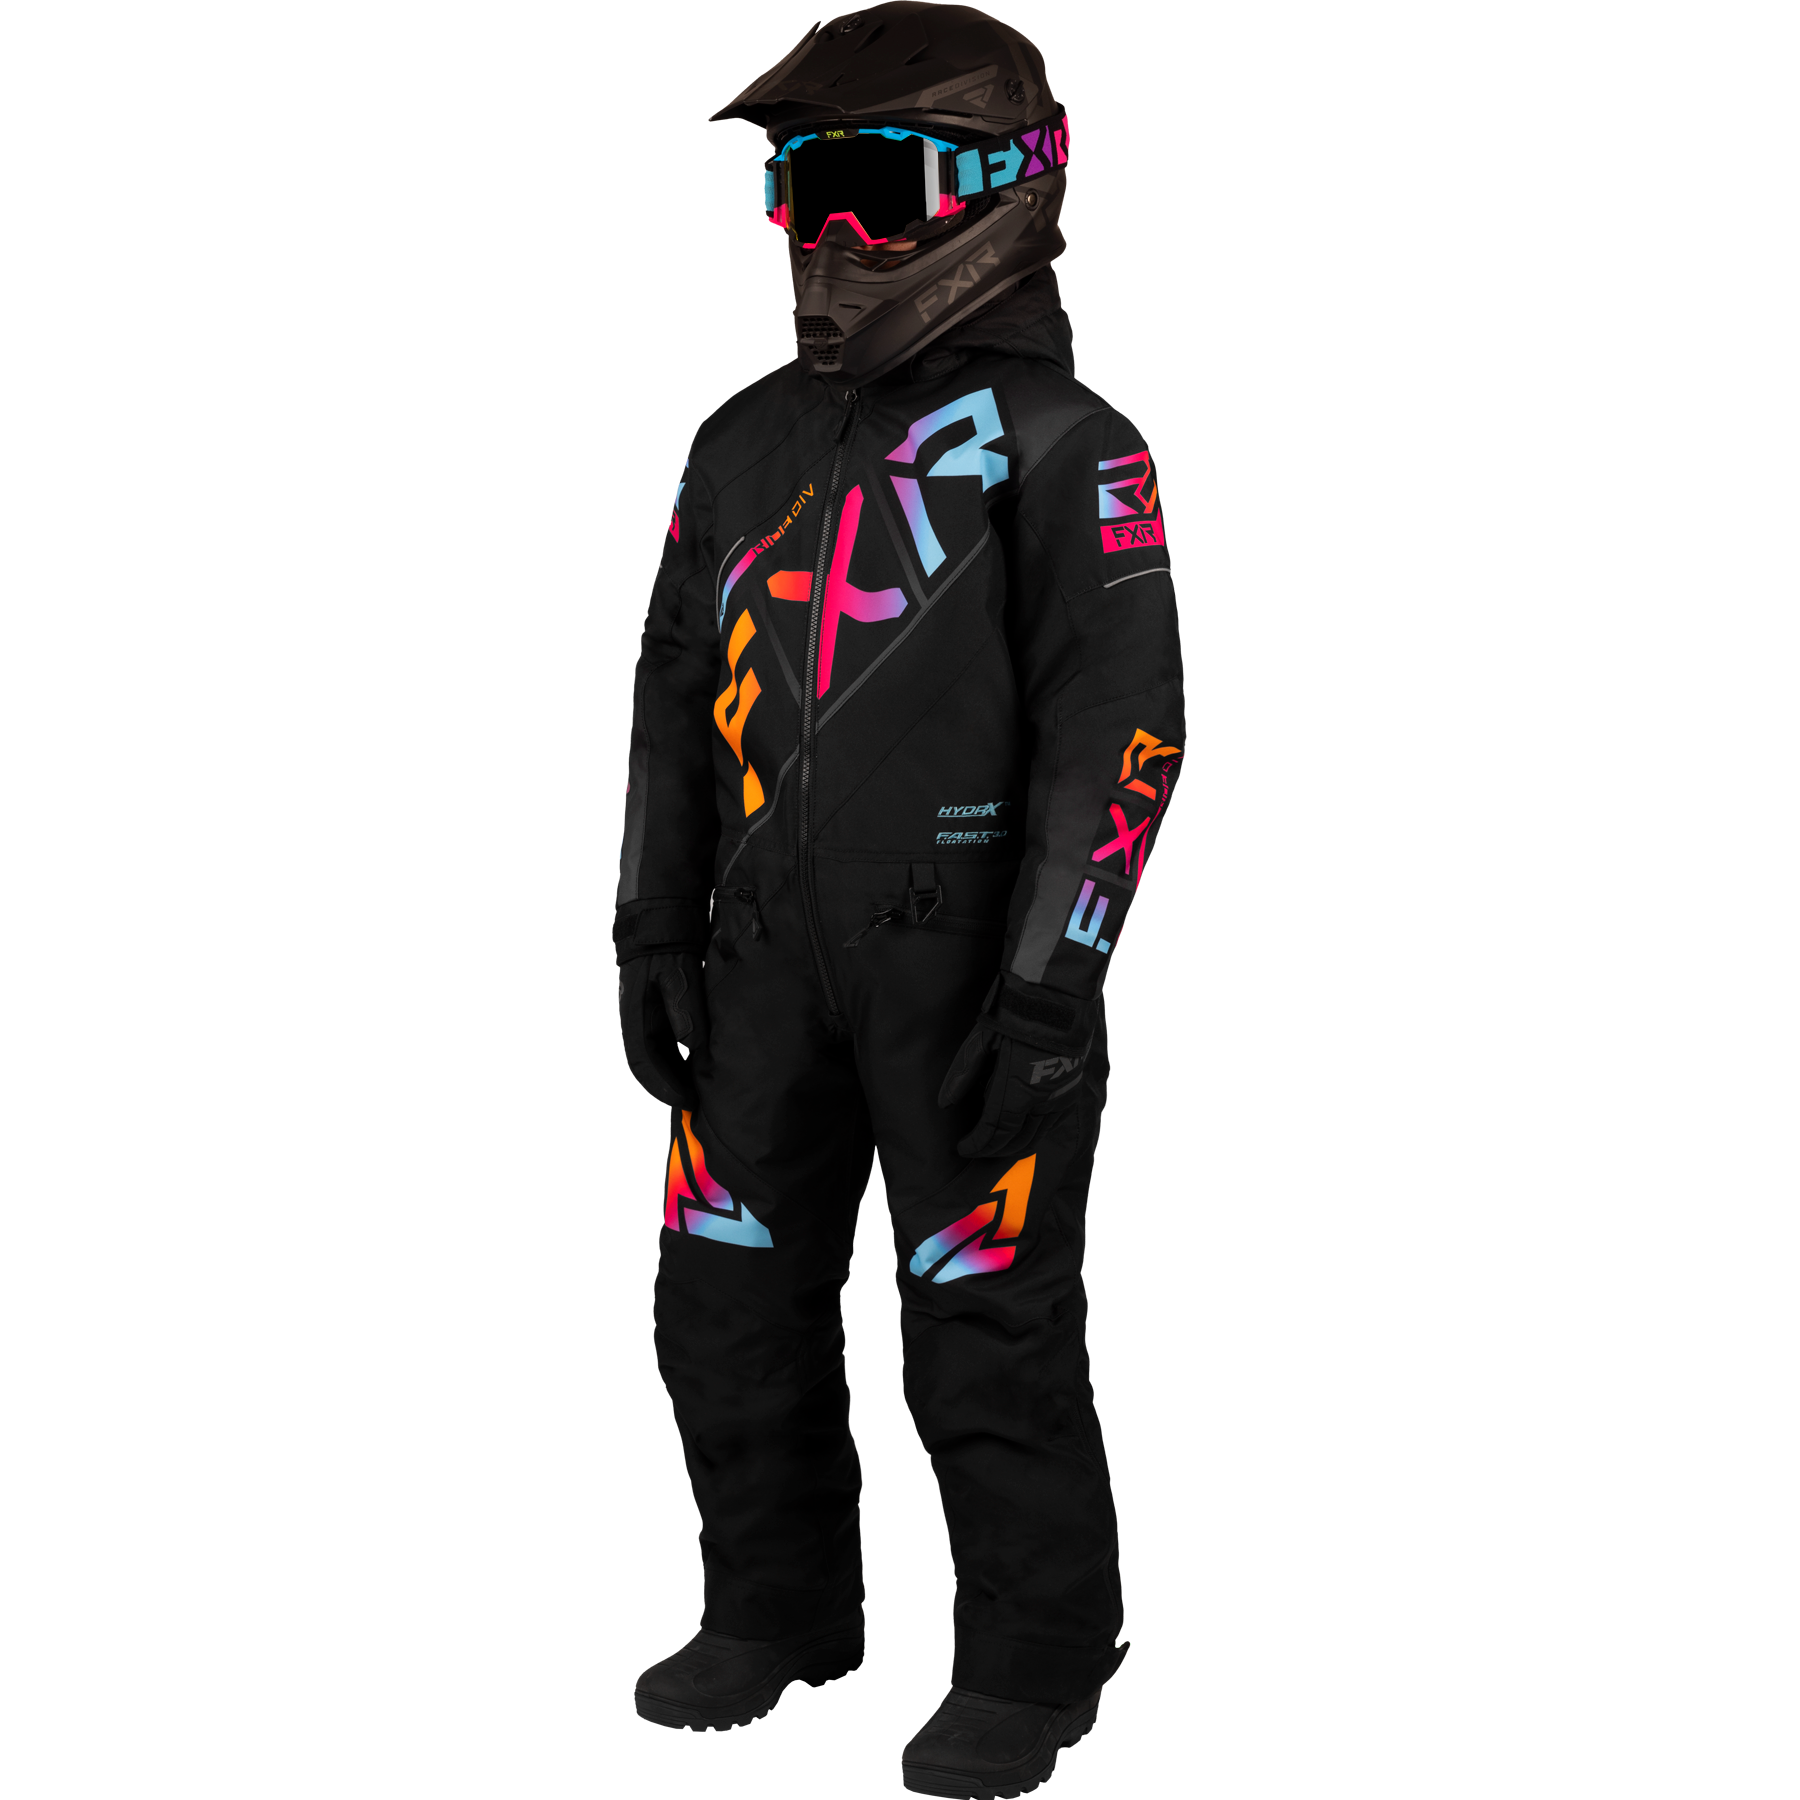 fxr racing insulated monosuit for kids cx fast